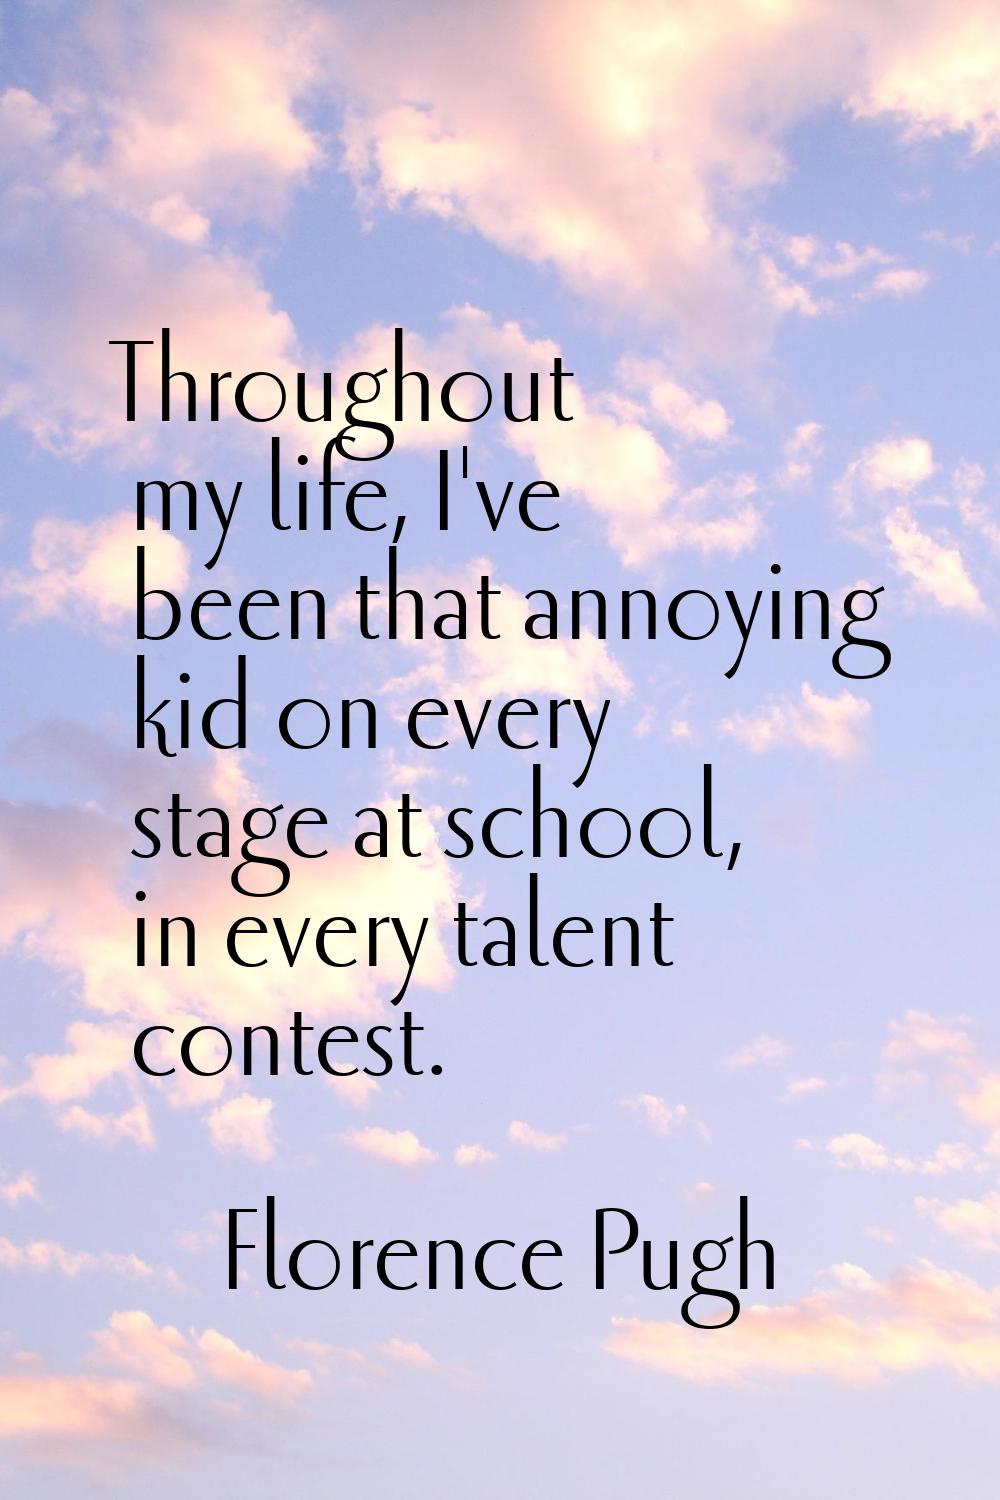 Throughout my life, I've been that annoying kid on every stage at school, in every talent contest.